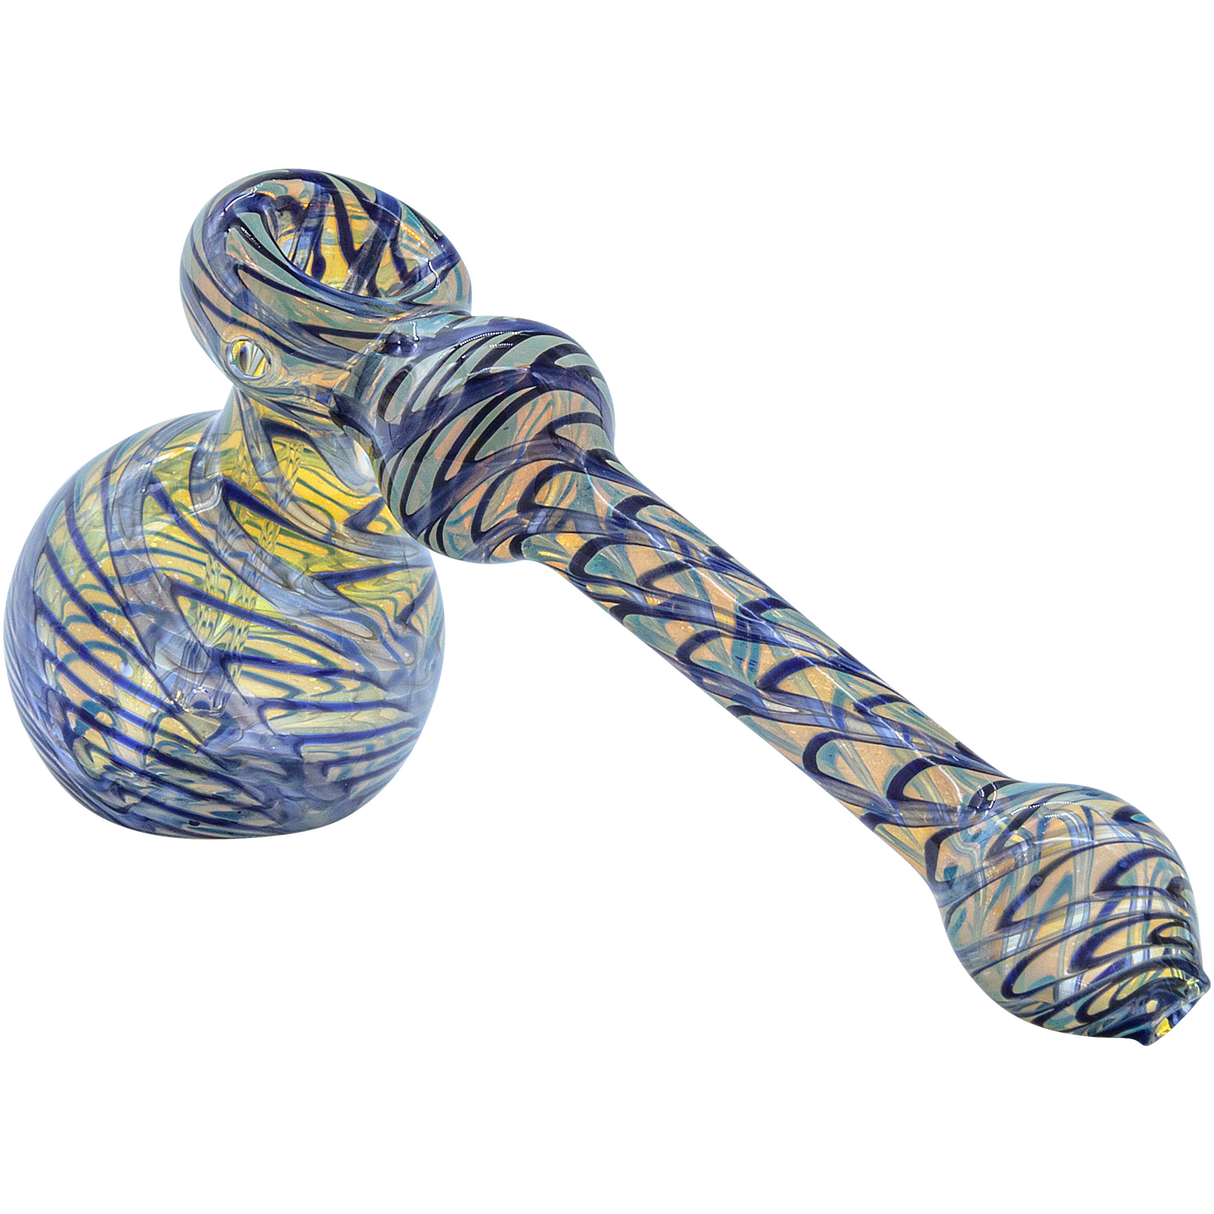 LA Pipes "Full Rake" Fumed Hammer Bubbler Pipe in blue, side view on white background